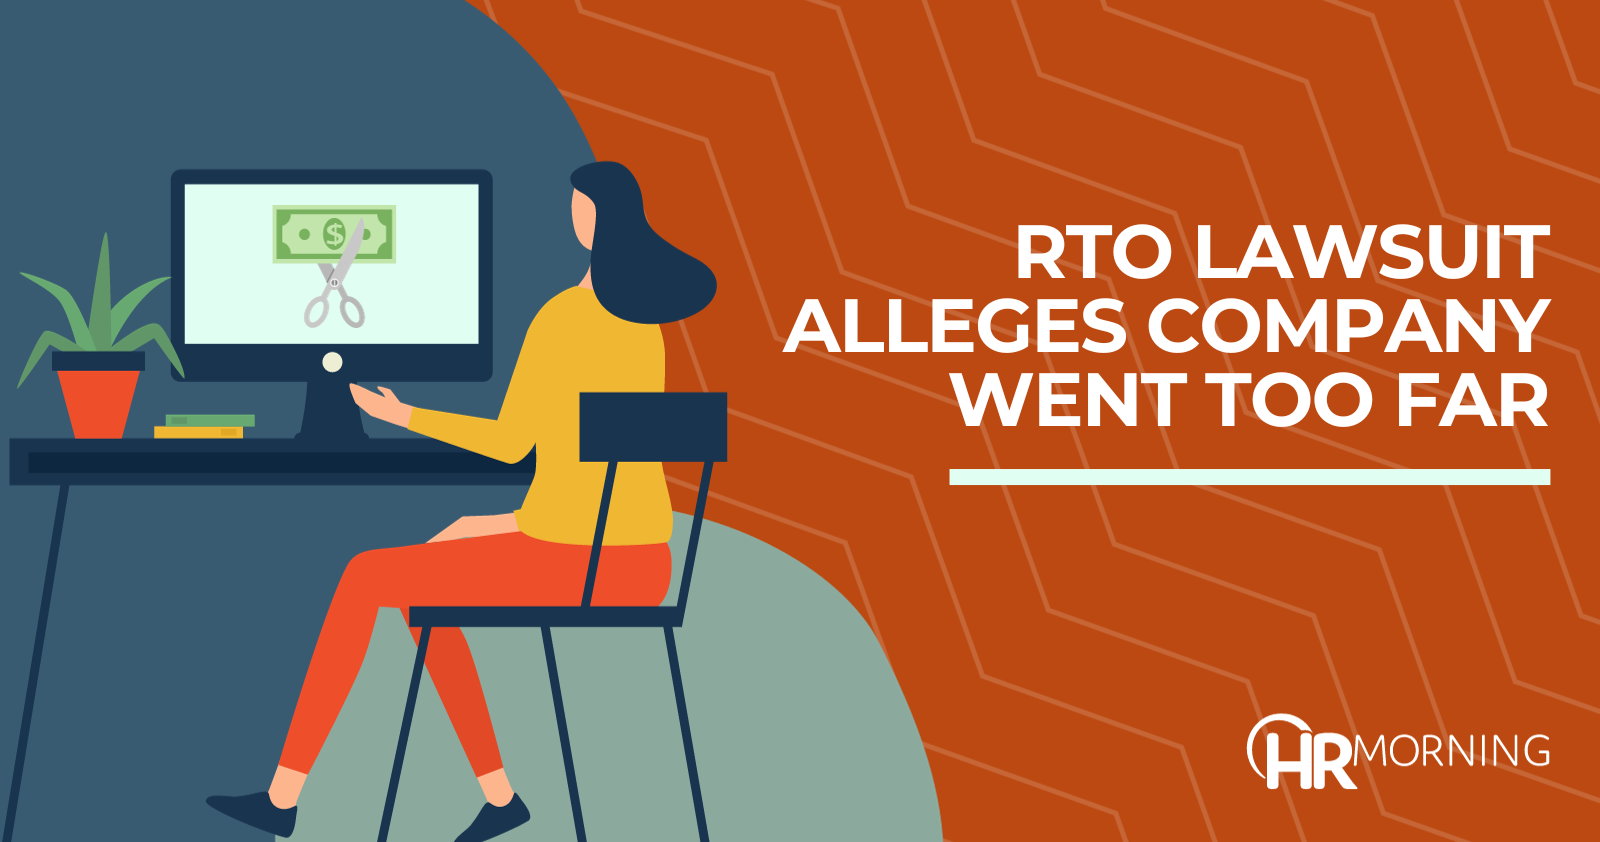 RTO lawsuit alleges company went too far